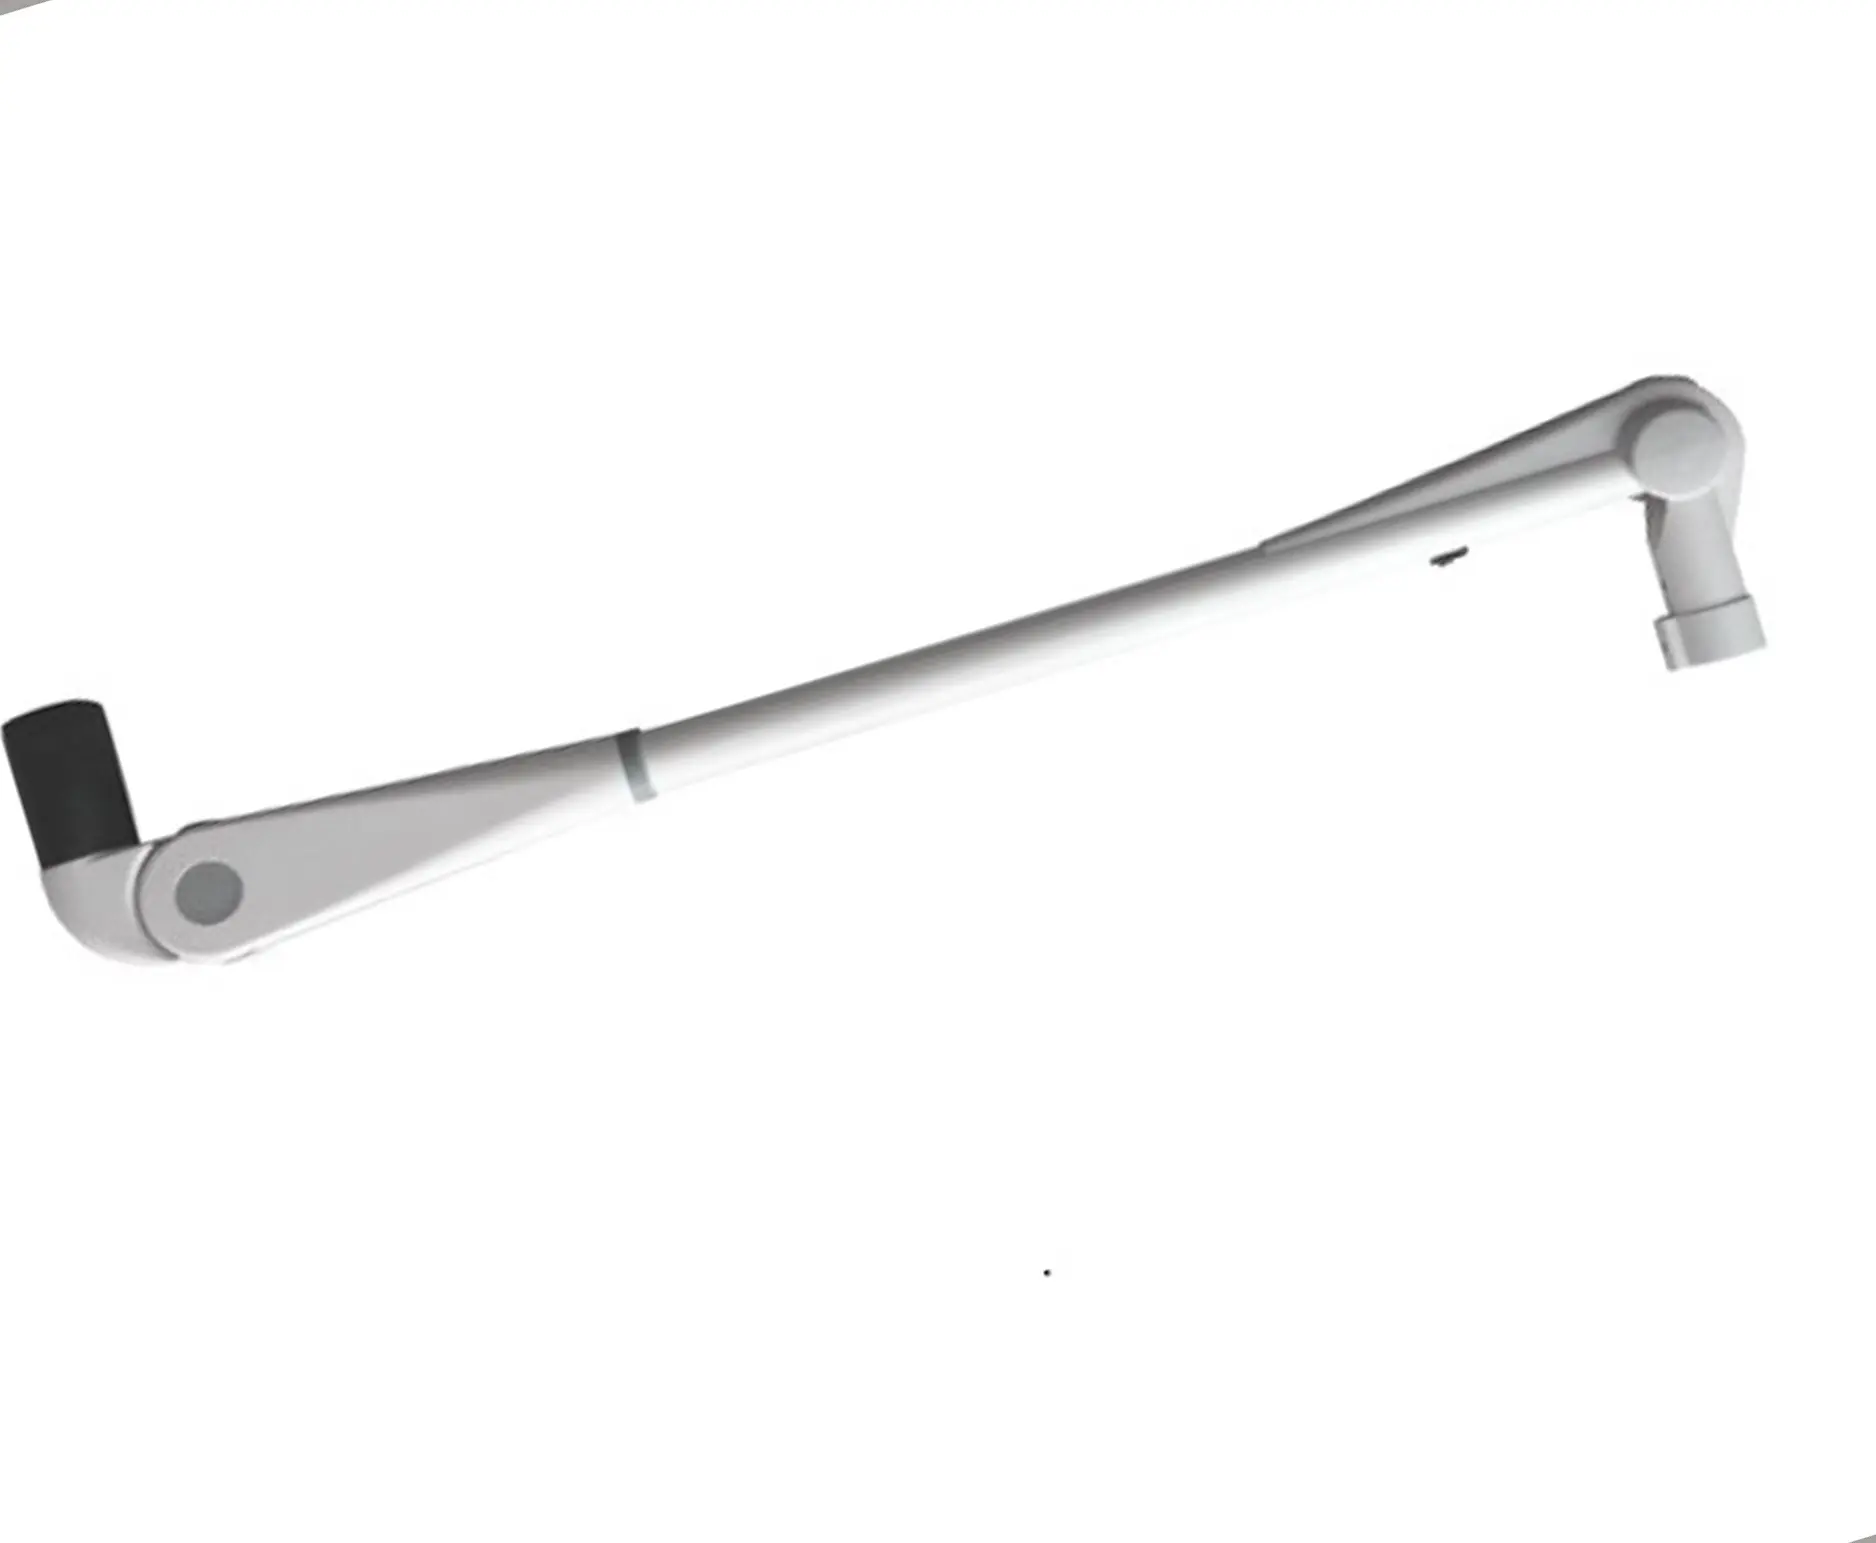 Surgical Lamp Manufacturer Hospital Medical Single Arm Ceiling Mounted OT Shadowless Surgical Led Operating Lamp For Operating Room Surgery